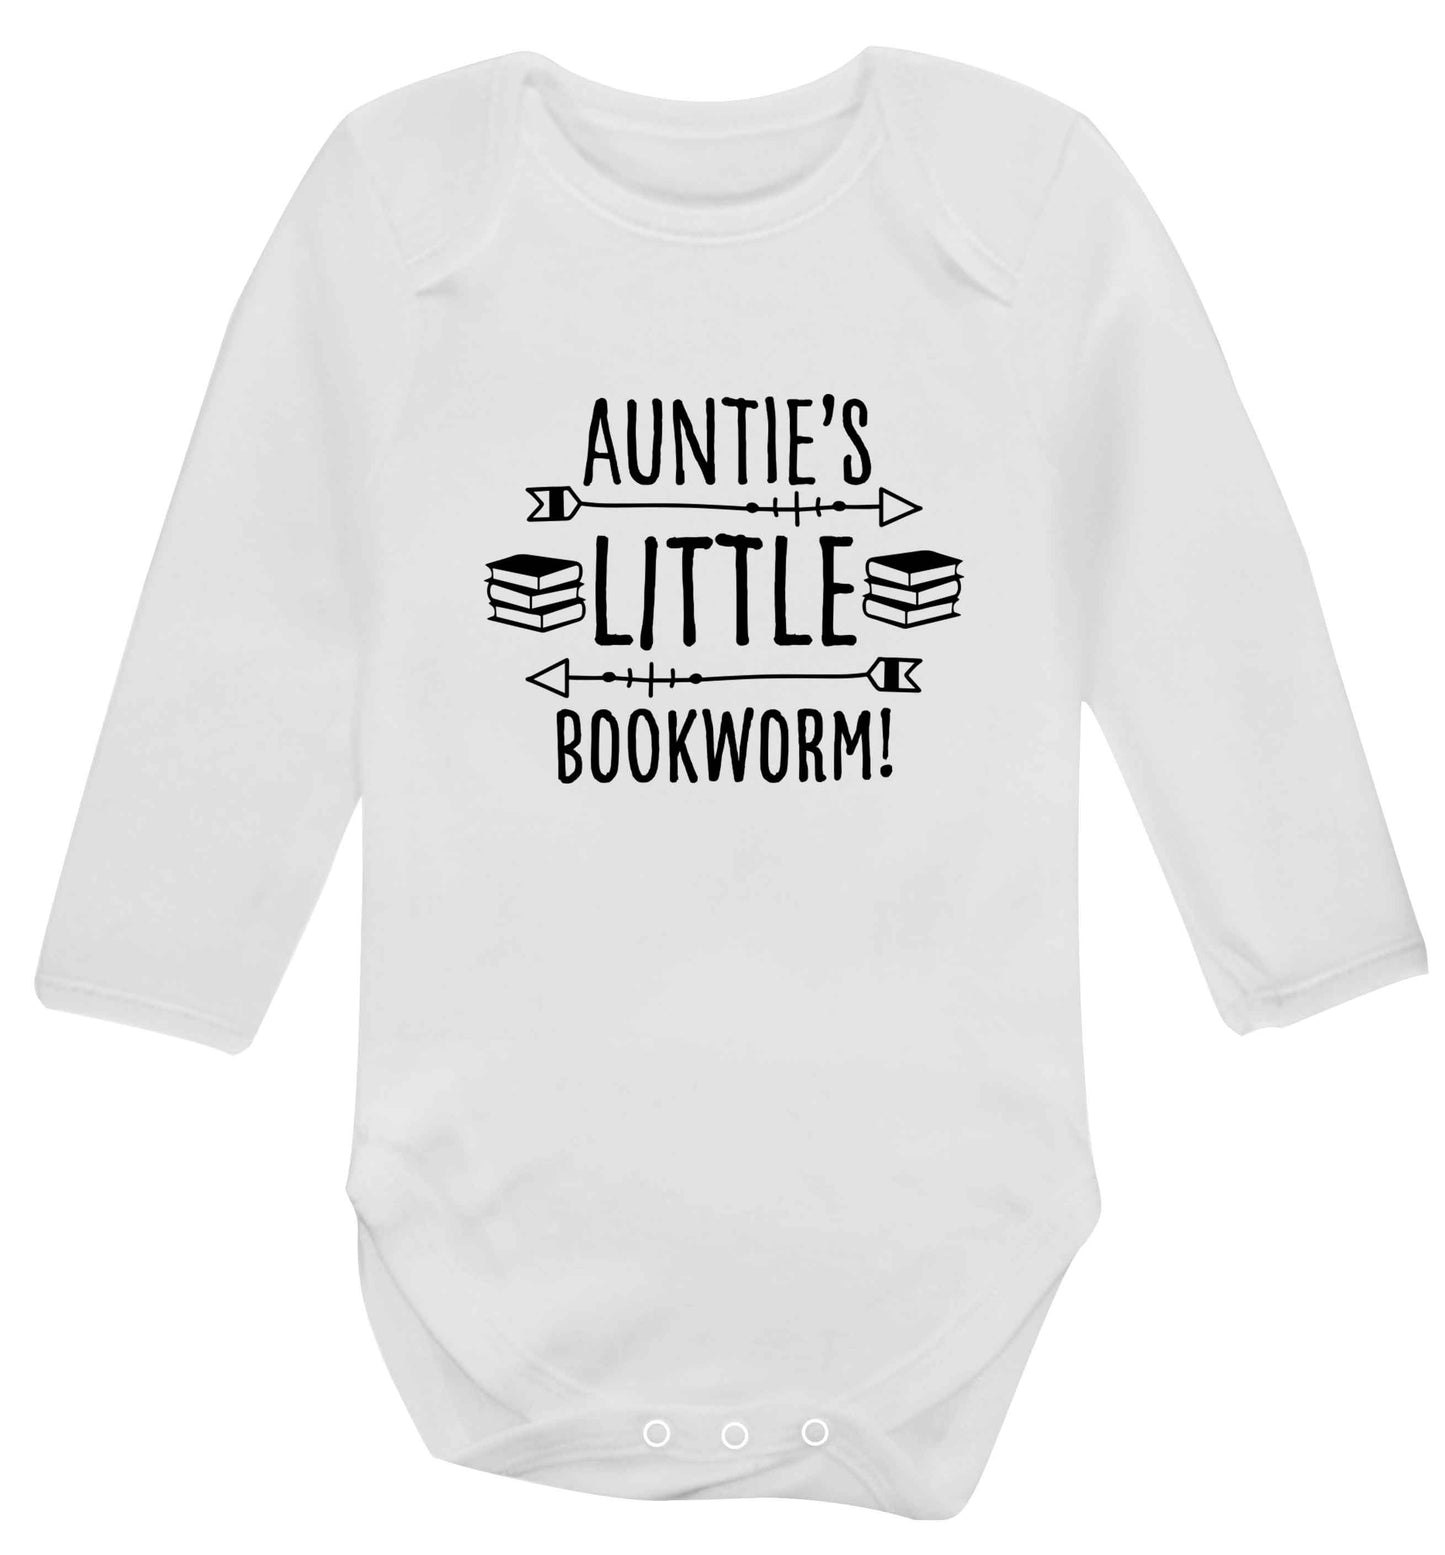 Auntie's little bookworm baby vest long sleeved white 6-12 months